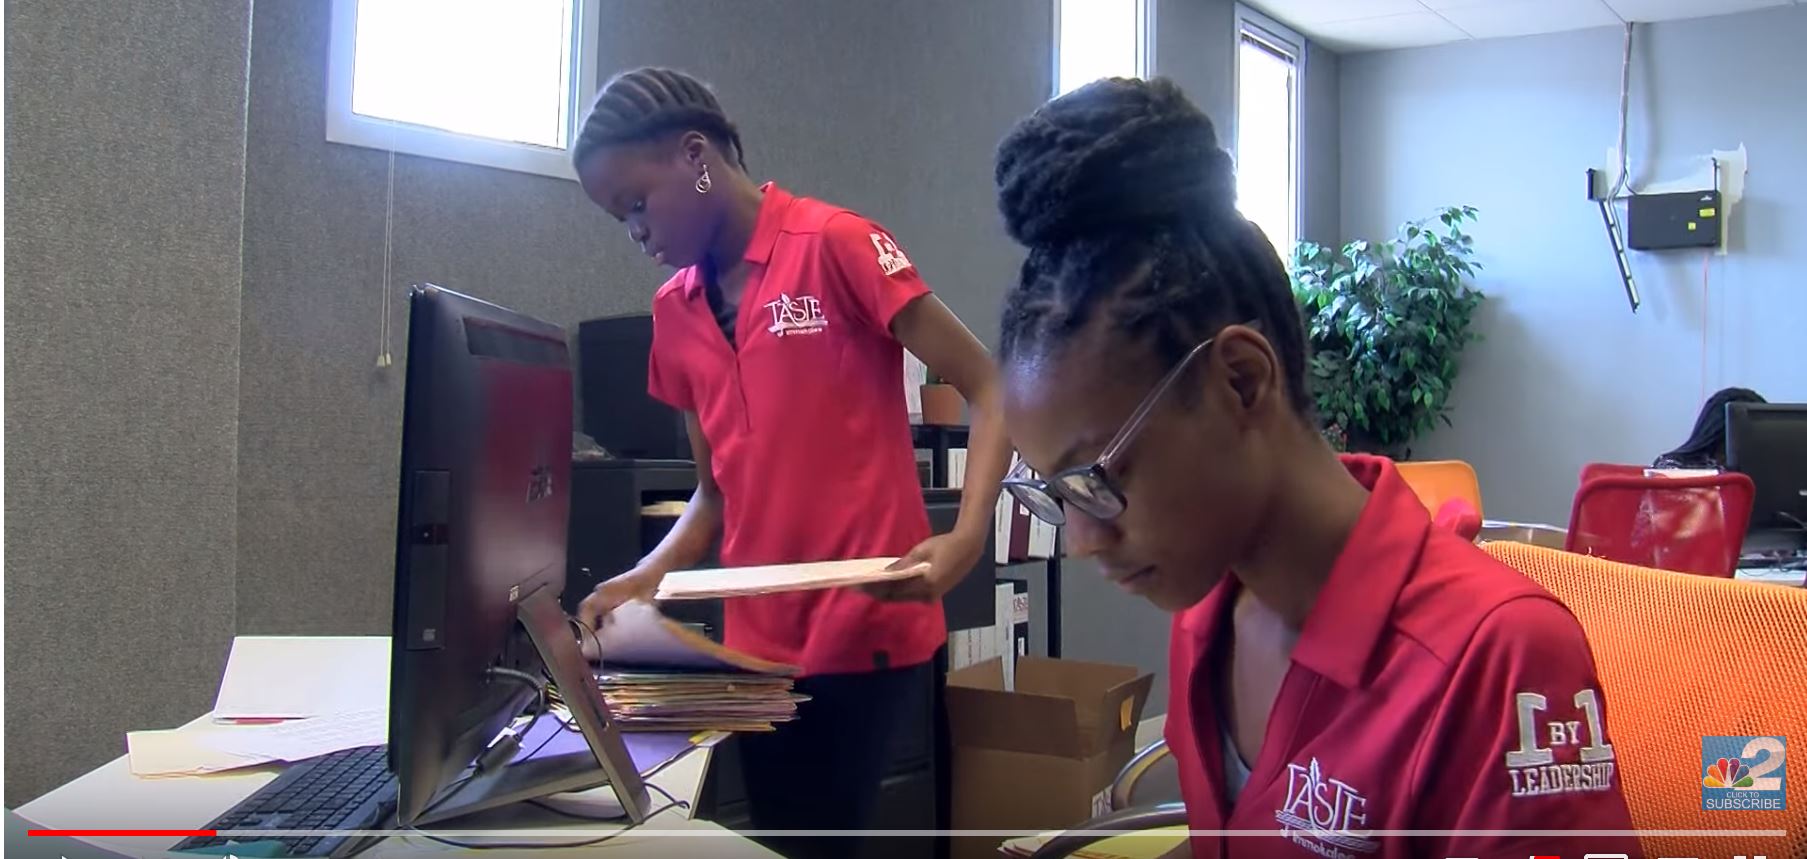 NBC2: Immokalee Teens Find Success With Unusual Business Plan